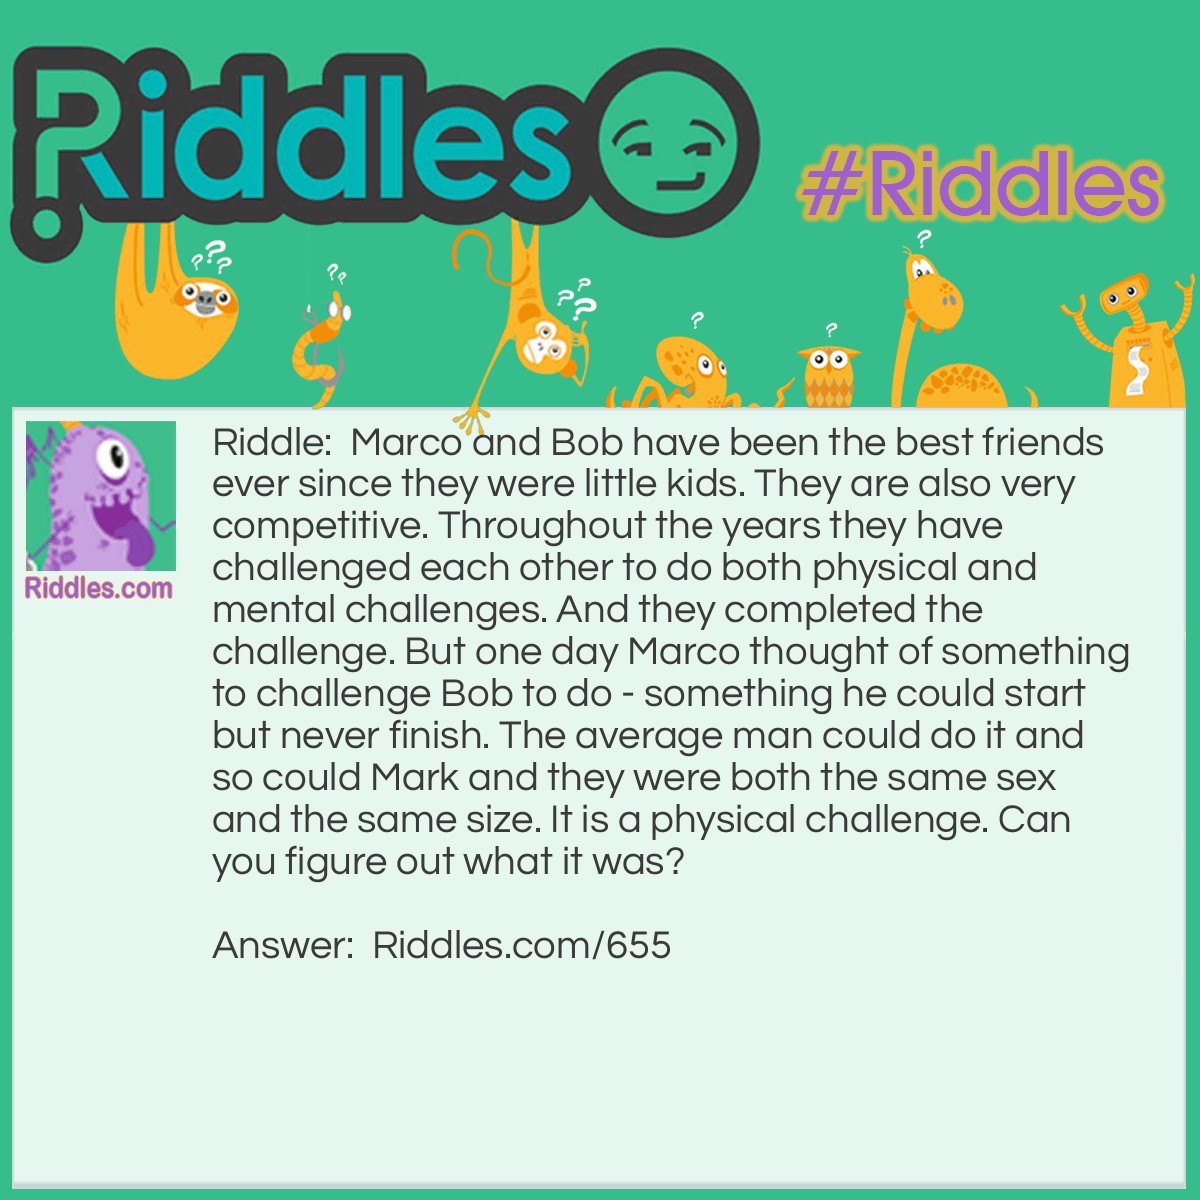 Riddle: Marco and Bob have been the best friends ever since they were little kids. They are also very competitive. Throughout the years they have challenged each other to do both physical and mental challenges. And they completed the challenge. But one day Marco thought of something to challenge Bob to do - something he could start but never finish. The average man could do it and so could Mark and they were both the same sex and the same size. It is a physical challenge. Can you figure out what it was? Answer: Marco challenged Bob to get a tan, but he couldn't...Bob is an albino.